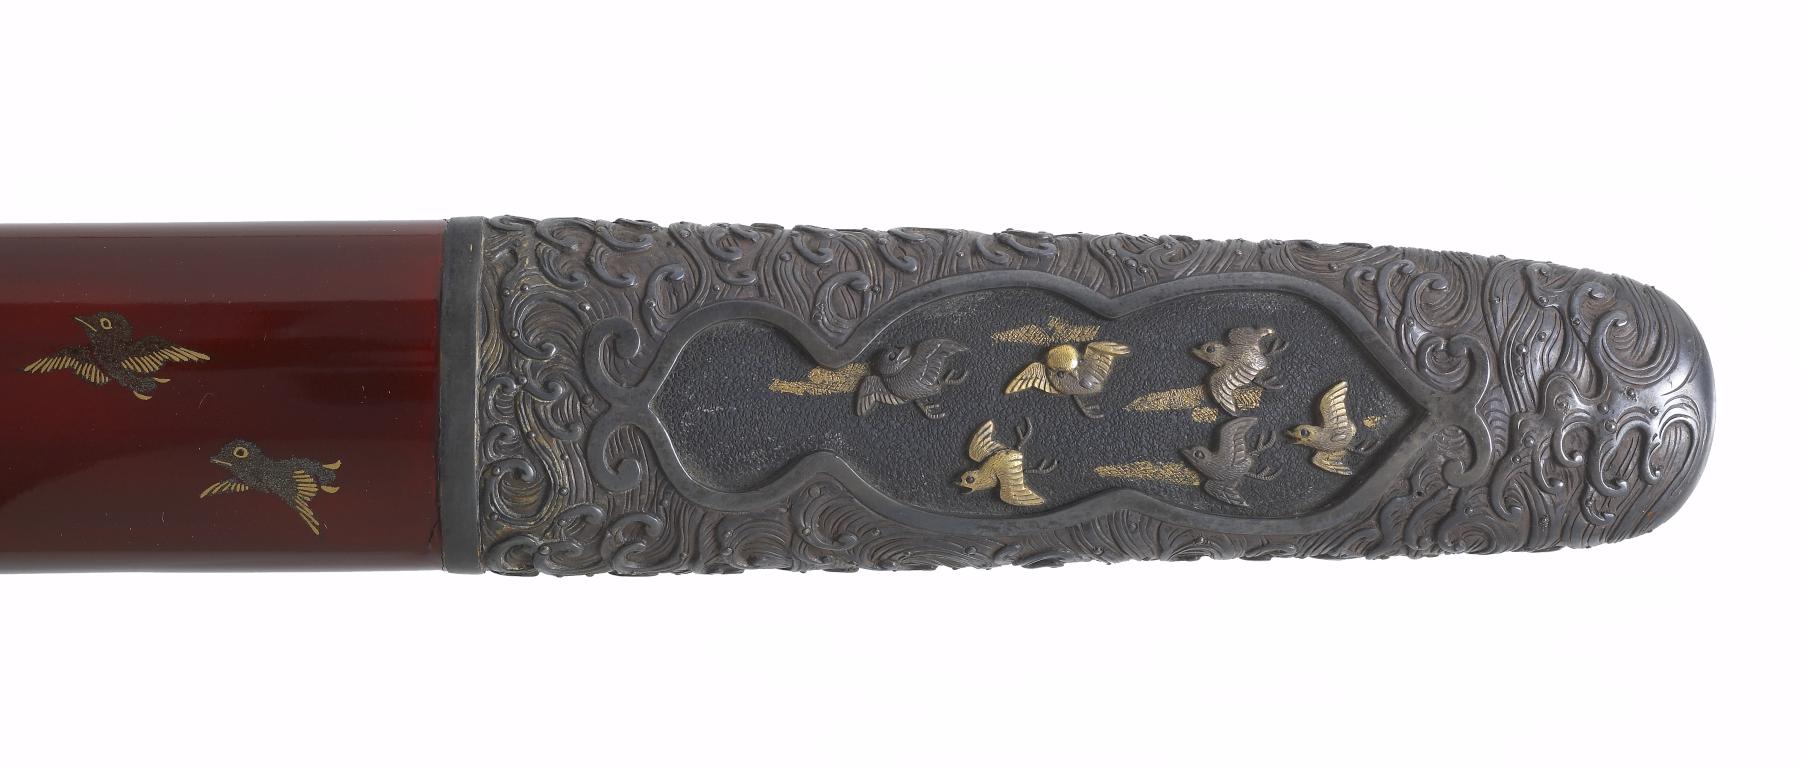 Image for Sword (katana) with a dark red lacquer saya and plovers in gold (includes 51.1212.1-51.1212.4)